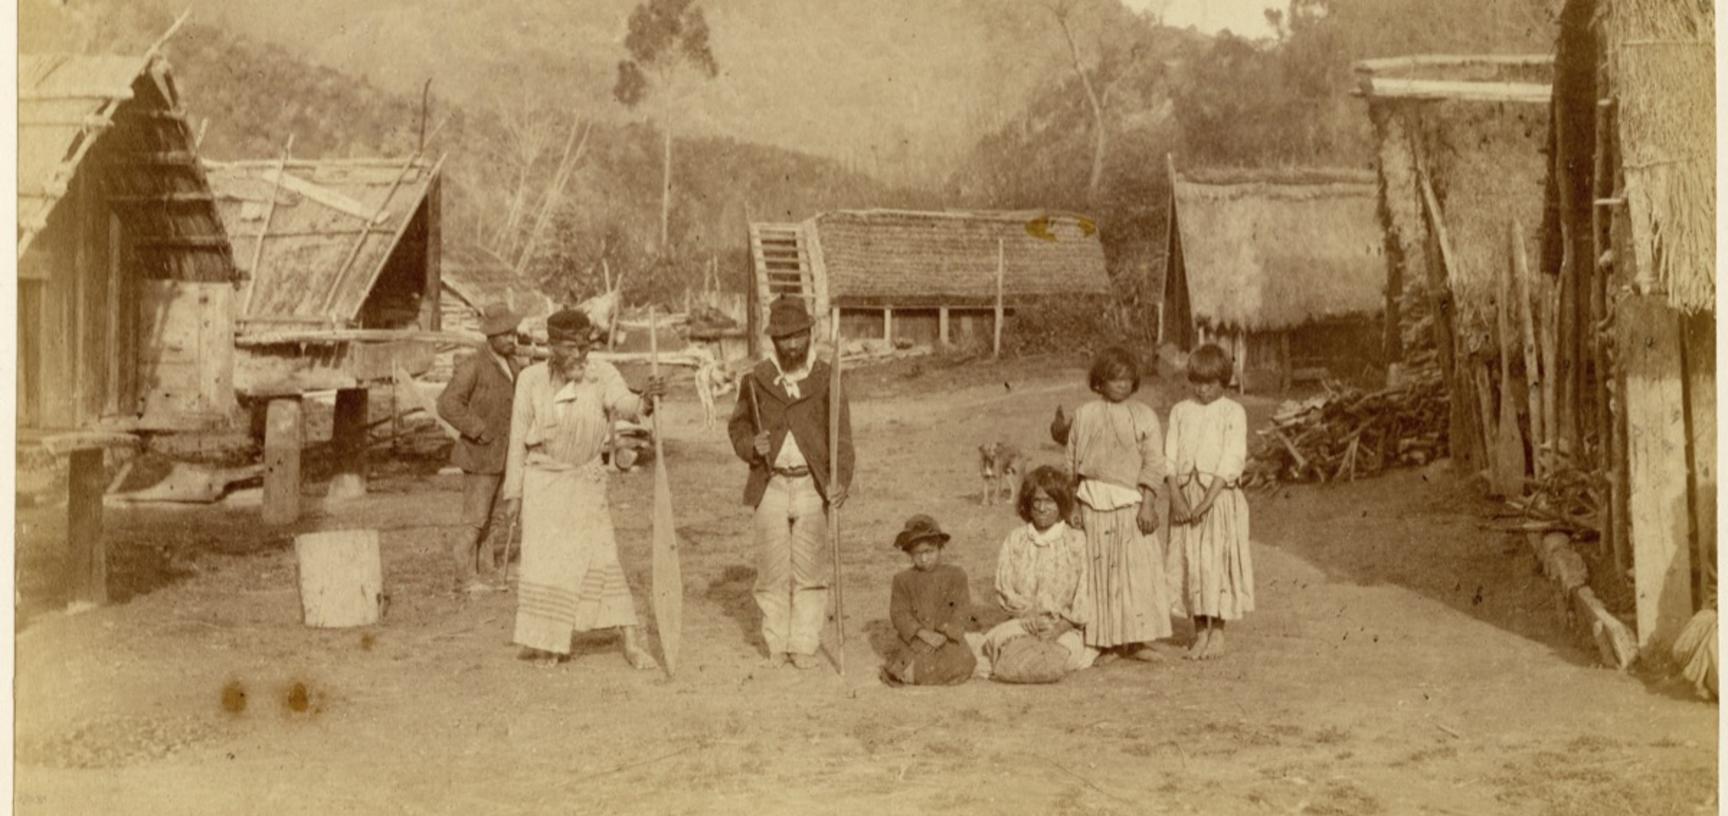 Māori family pictured amidst houses at Pipiriki, a settlement on the Whanganui River. Photograph by Alfred Burton for the Burton Brothers studio (Dunedin). Pipiriki, North Island, New Zealand. 11 May 1885.